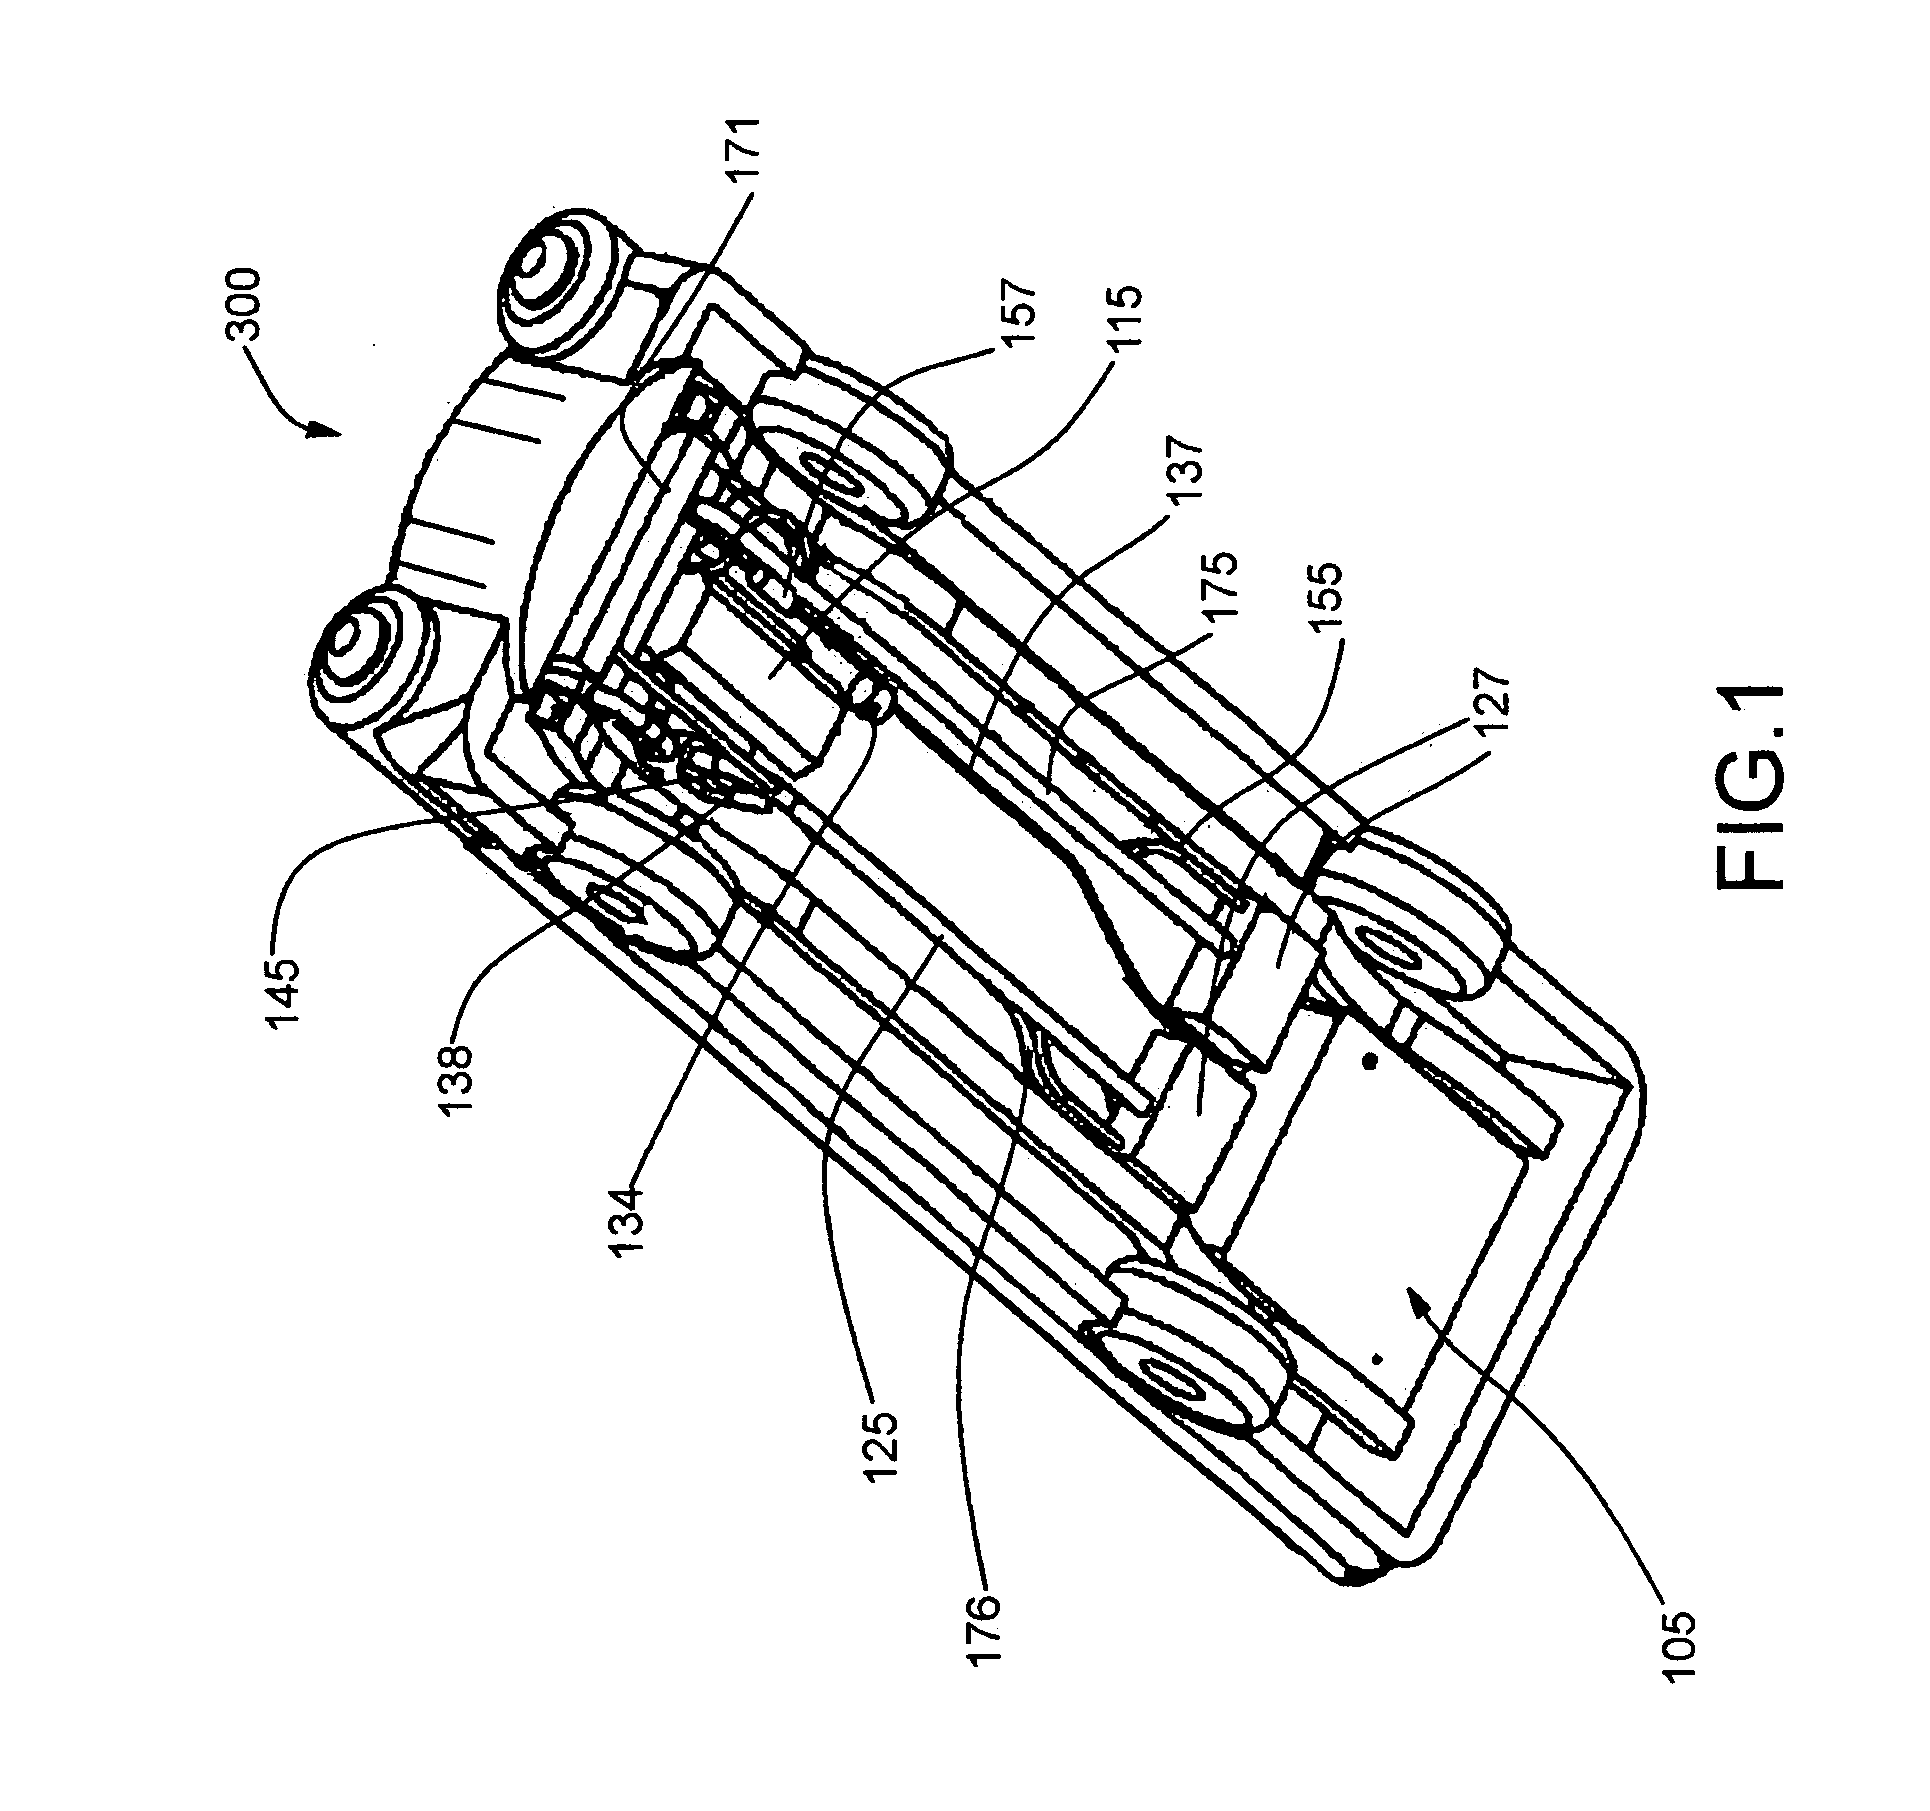 Thermal engine using noncombustible fuels for powering transport vehicles and other uses